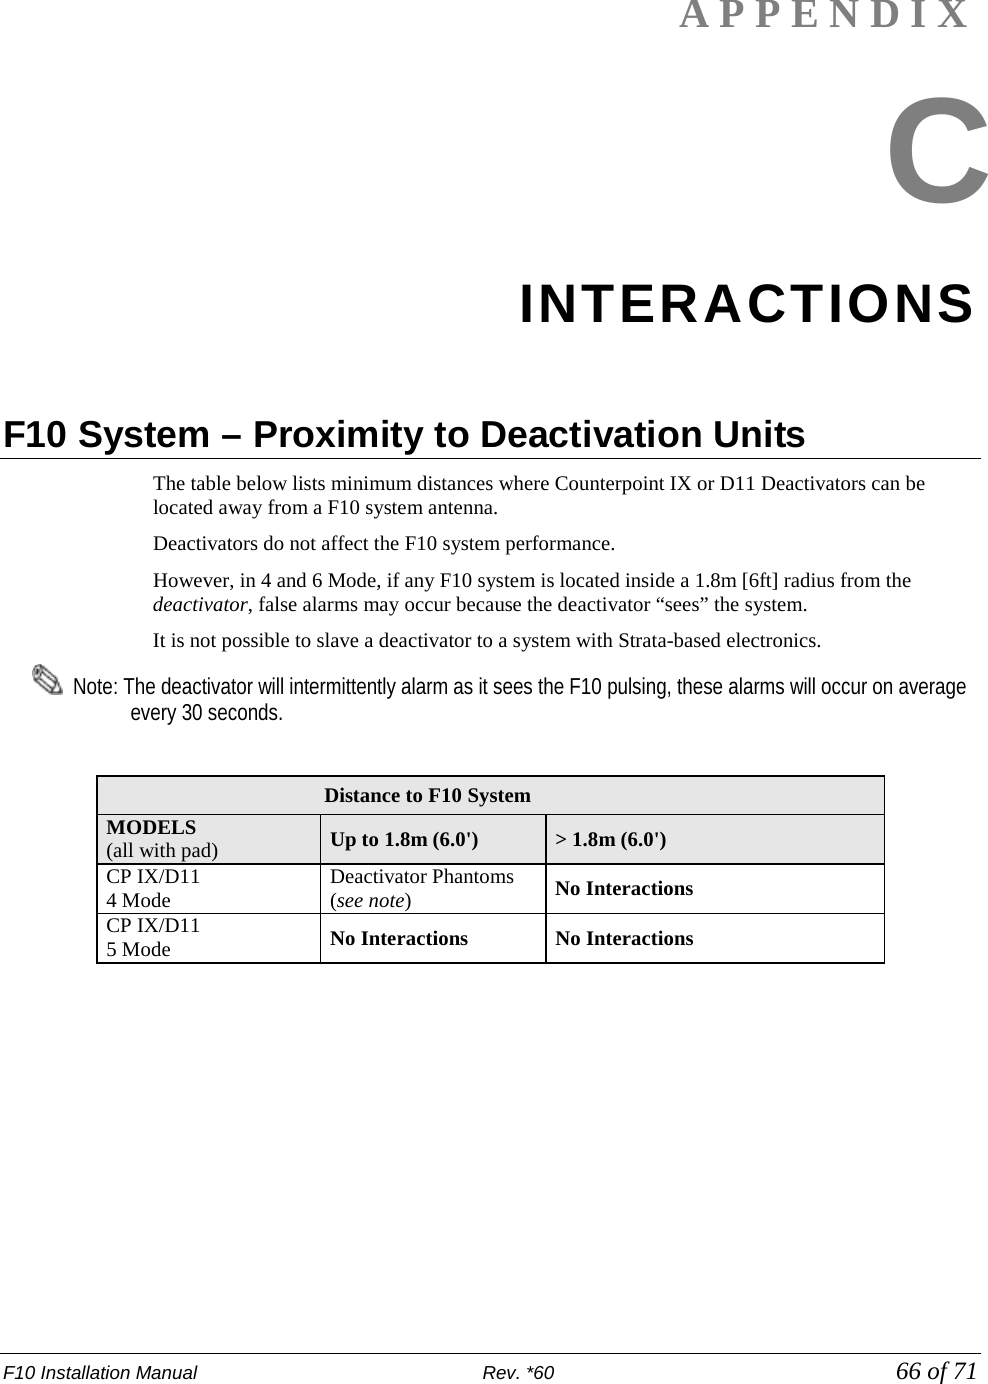 F10 Installation Manual                          Rev. *60            66 of 71  APPENDIX C INTERACTIONS    F10 System – Proximity to Deactivation Units The table below lists minimum distances where Counterpoint IX or D11 Deactivators can be located away from a F10 system antenna.  Deactivators do not affect the F10 system performance.  However, in 4 and 6 Mode, if any F10 system is located inside a 1.8m [6ft] radius from the deactivator, false alarms may occur because the deactivator “sees” the system.  It is not possible to slave a deactivator to a system with Strata-based electronics.   Note: The deactivator will intermittently alarm as it sees the F10 pulsing, these alarms will occur on average every 30 seconds.   Distance to F10 System MODELS (all with pad) Up to 1.8m (6.0&apos;)  &gt; 1.8m (6.0&apos;) CP IX/D11  4 Mode Deactivator Phantoms (see note)  No Interactions CP IX/D11  5 Mode No Interactions No Interactions 